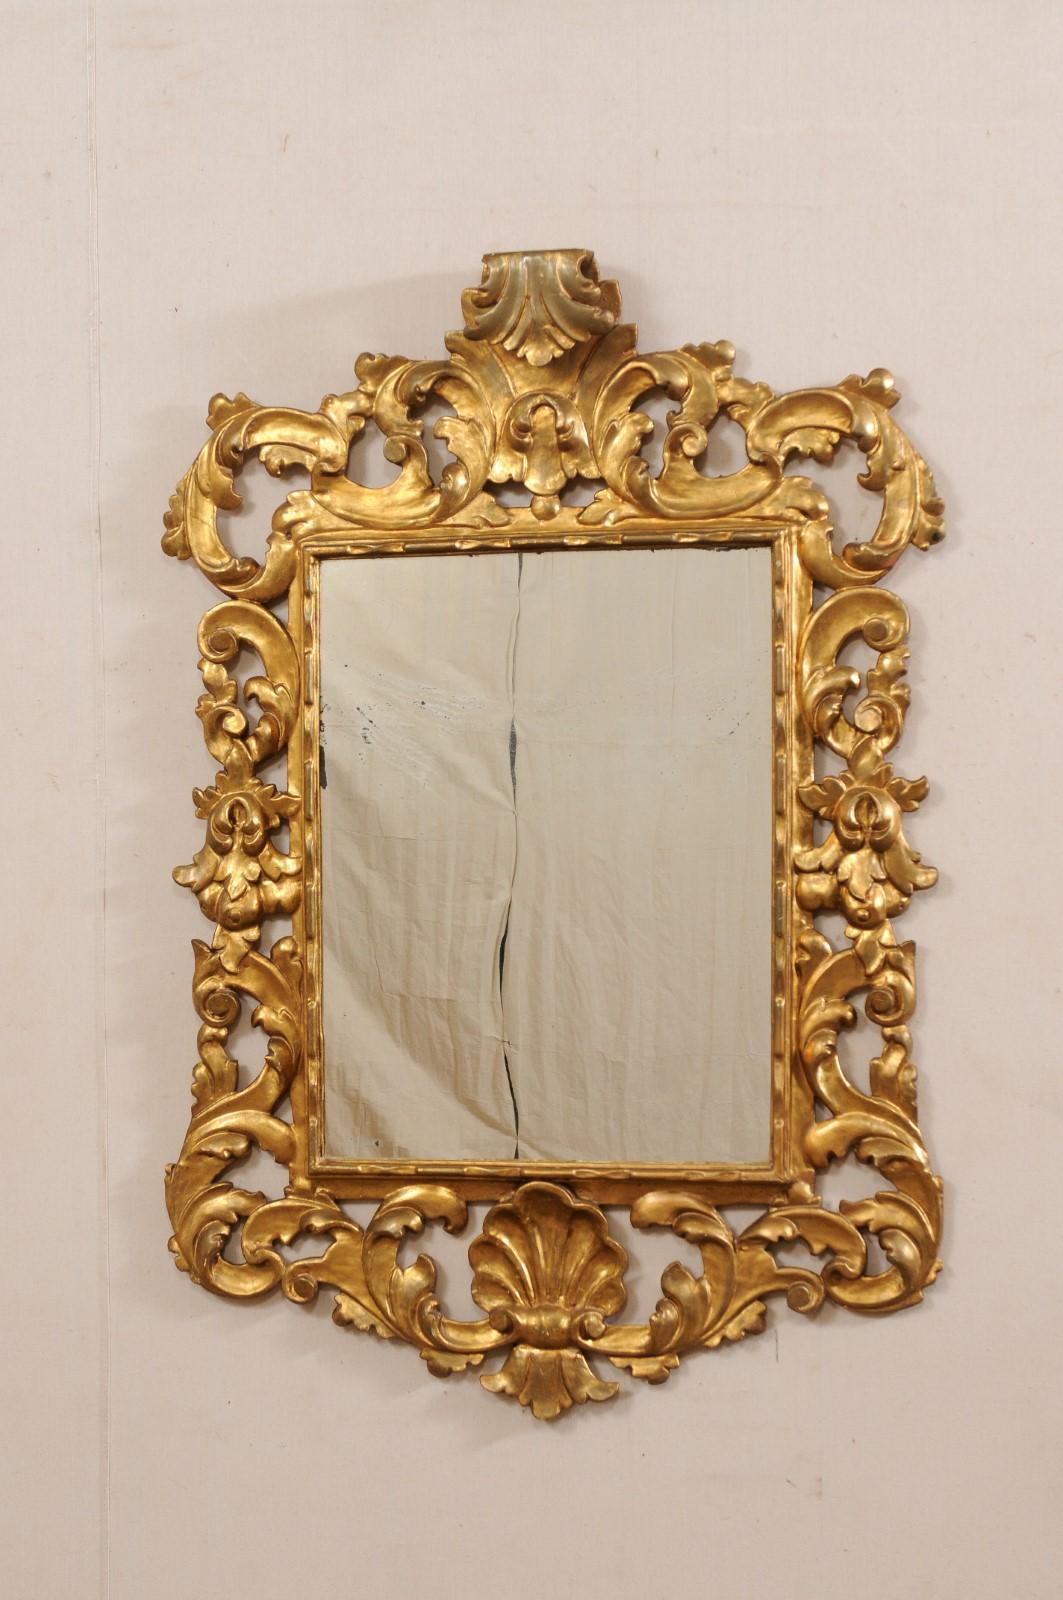 A French Rococo style carved and gilt wood mirror from the 19th century. This antique mirror from France has been designed in the ornate fashion of Rococo style, with a beautifully pierce-carved scrolling acanthus leaf surround, and shell at bottom